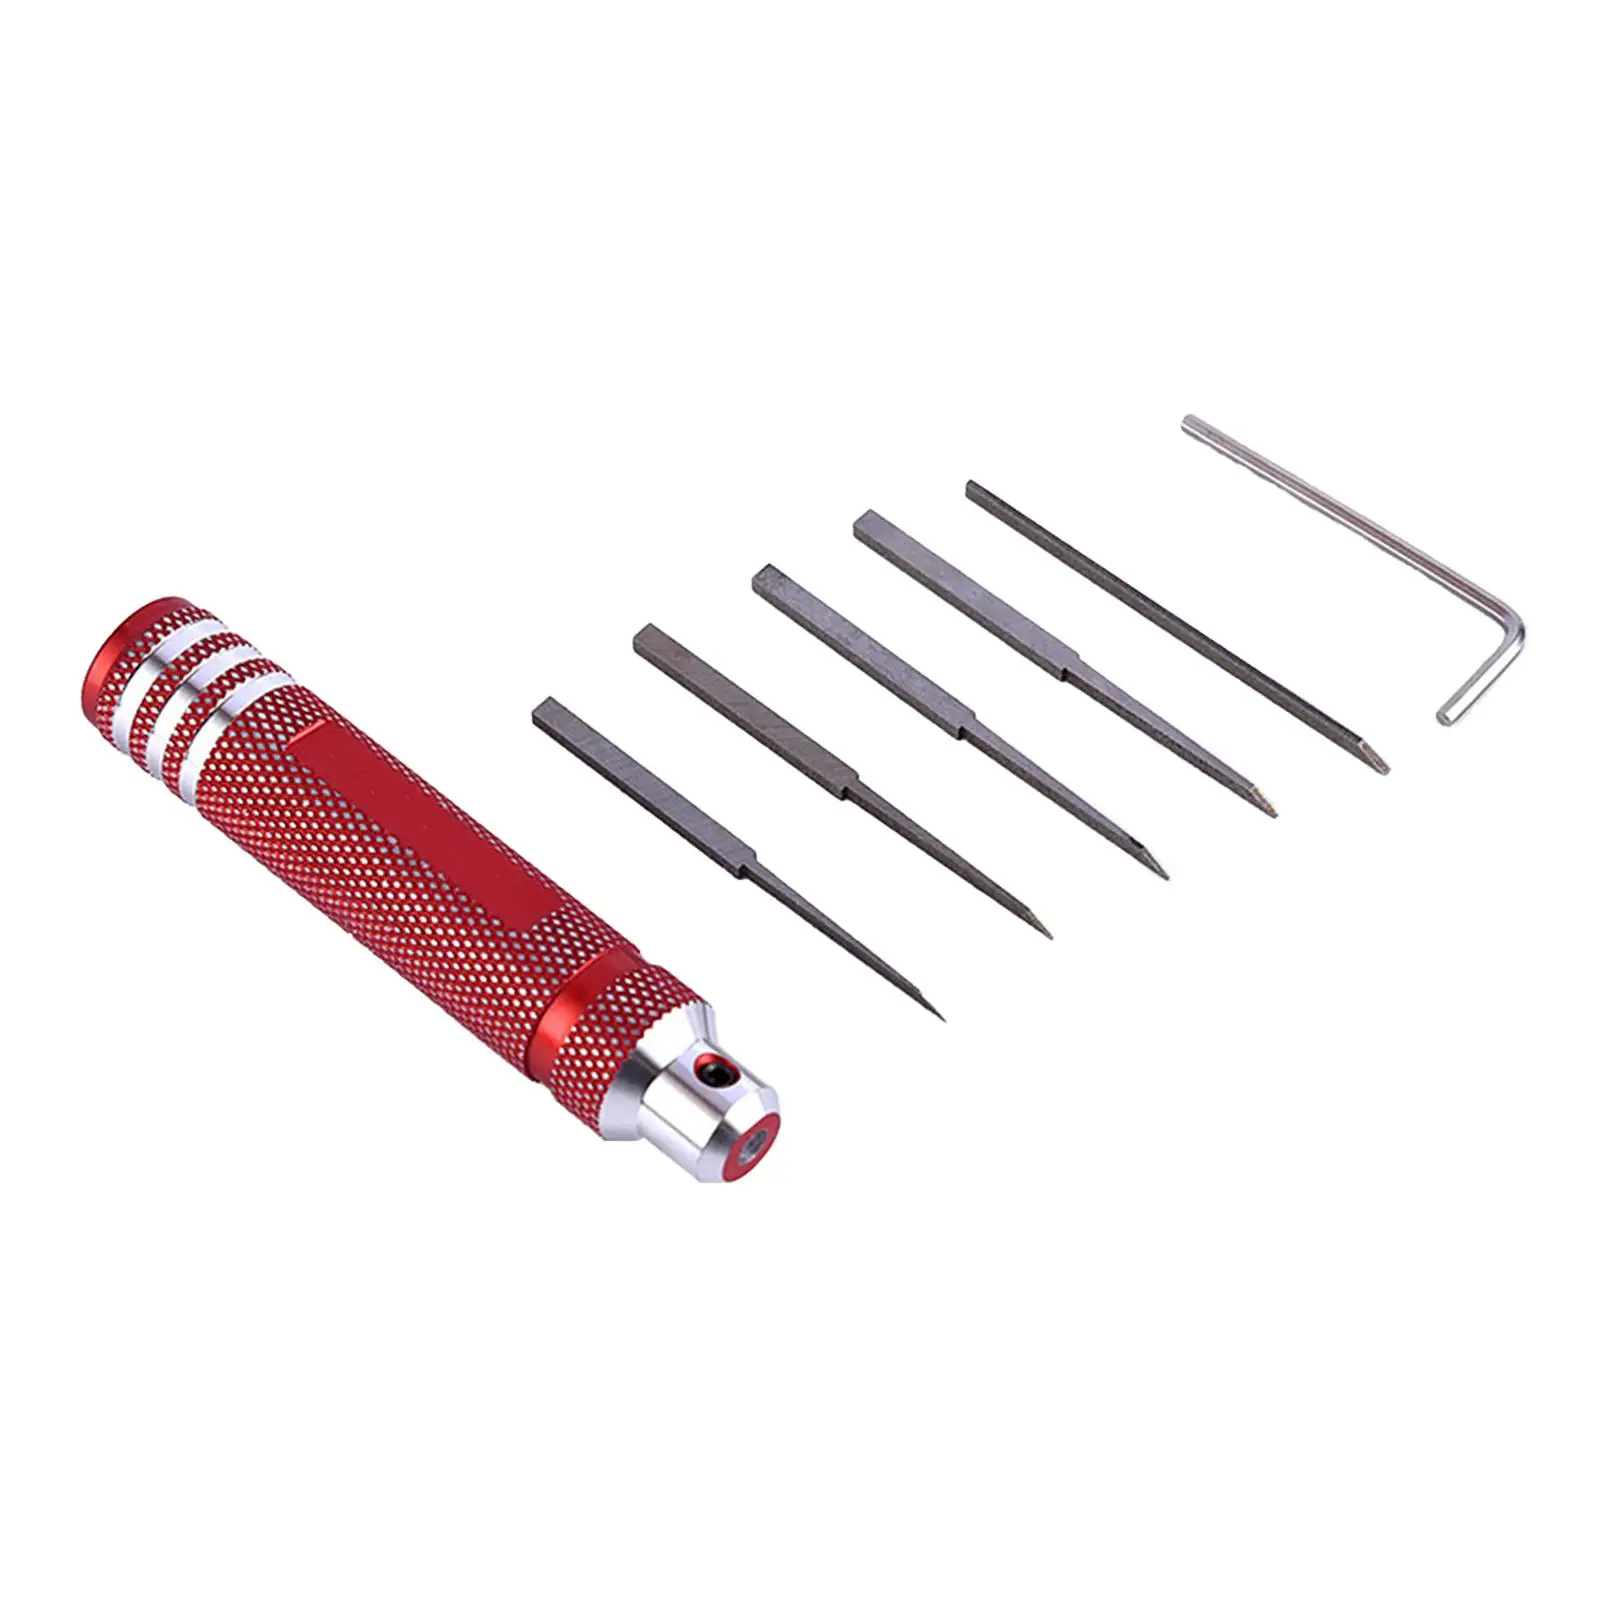 Model Scriber Tool Engraving Cutting Trimming Replace Hobby Knife for Clay Sculpture Repairing Pottery Modeling Carving Hobby